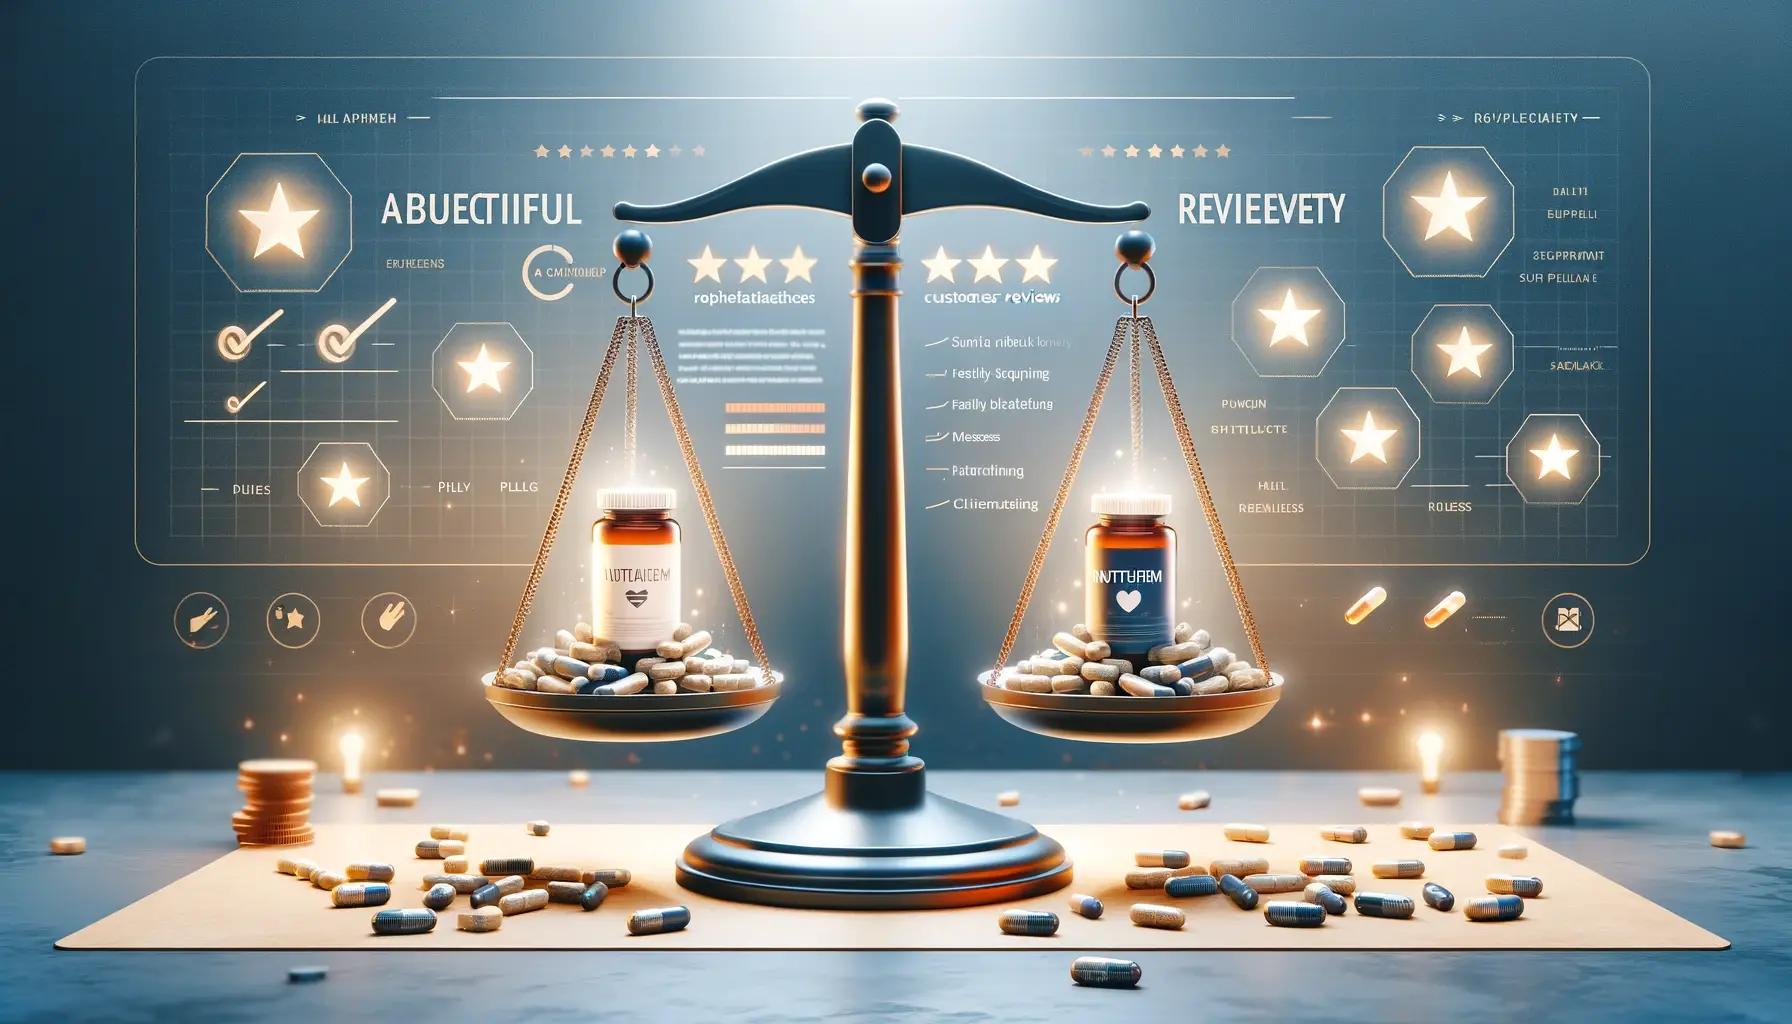 An engaging blog header image depicting a thoughtful, balanced review of a health supplement named Nutratherm. The image should show a balanced scale,